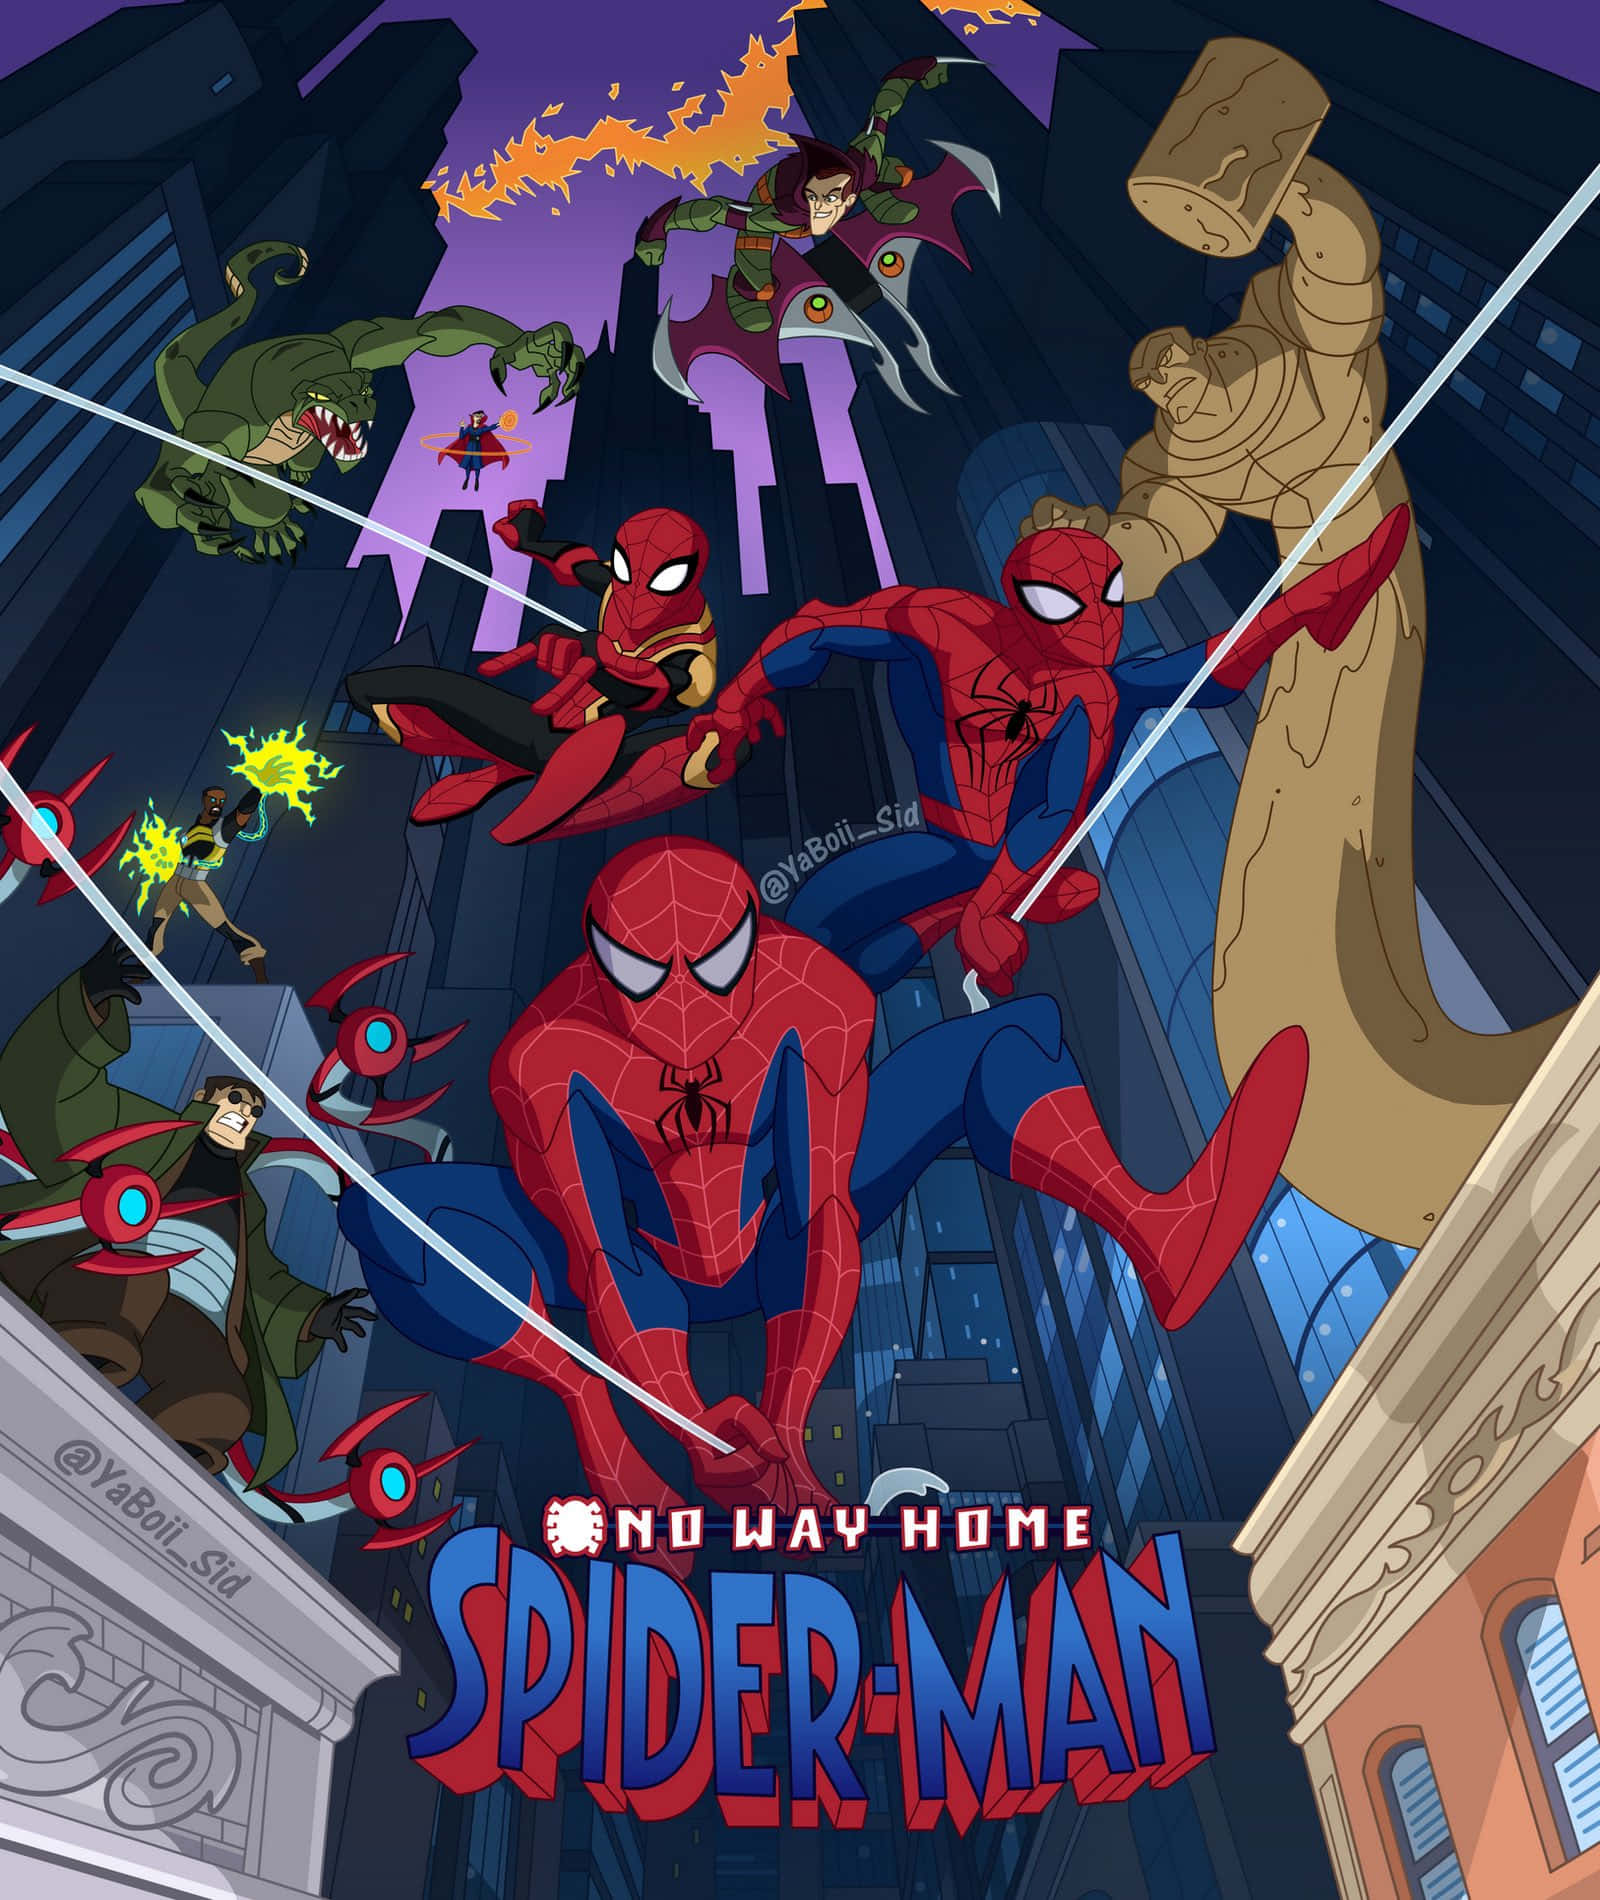 The Spectacular Spider-Man No Way Home Wallpaper